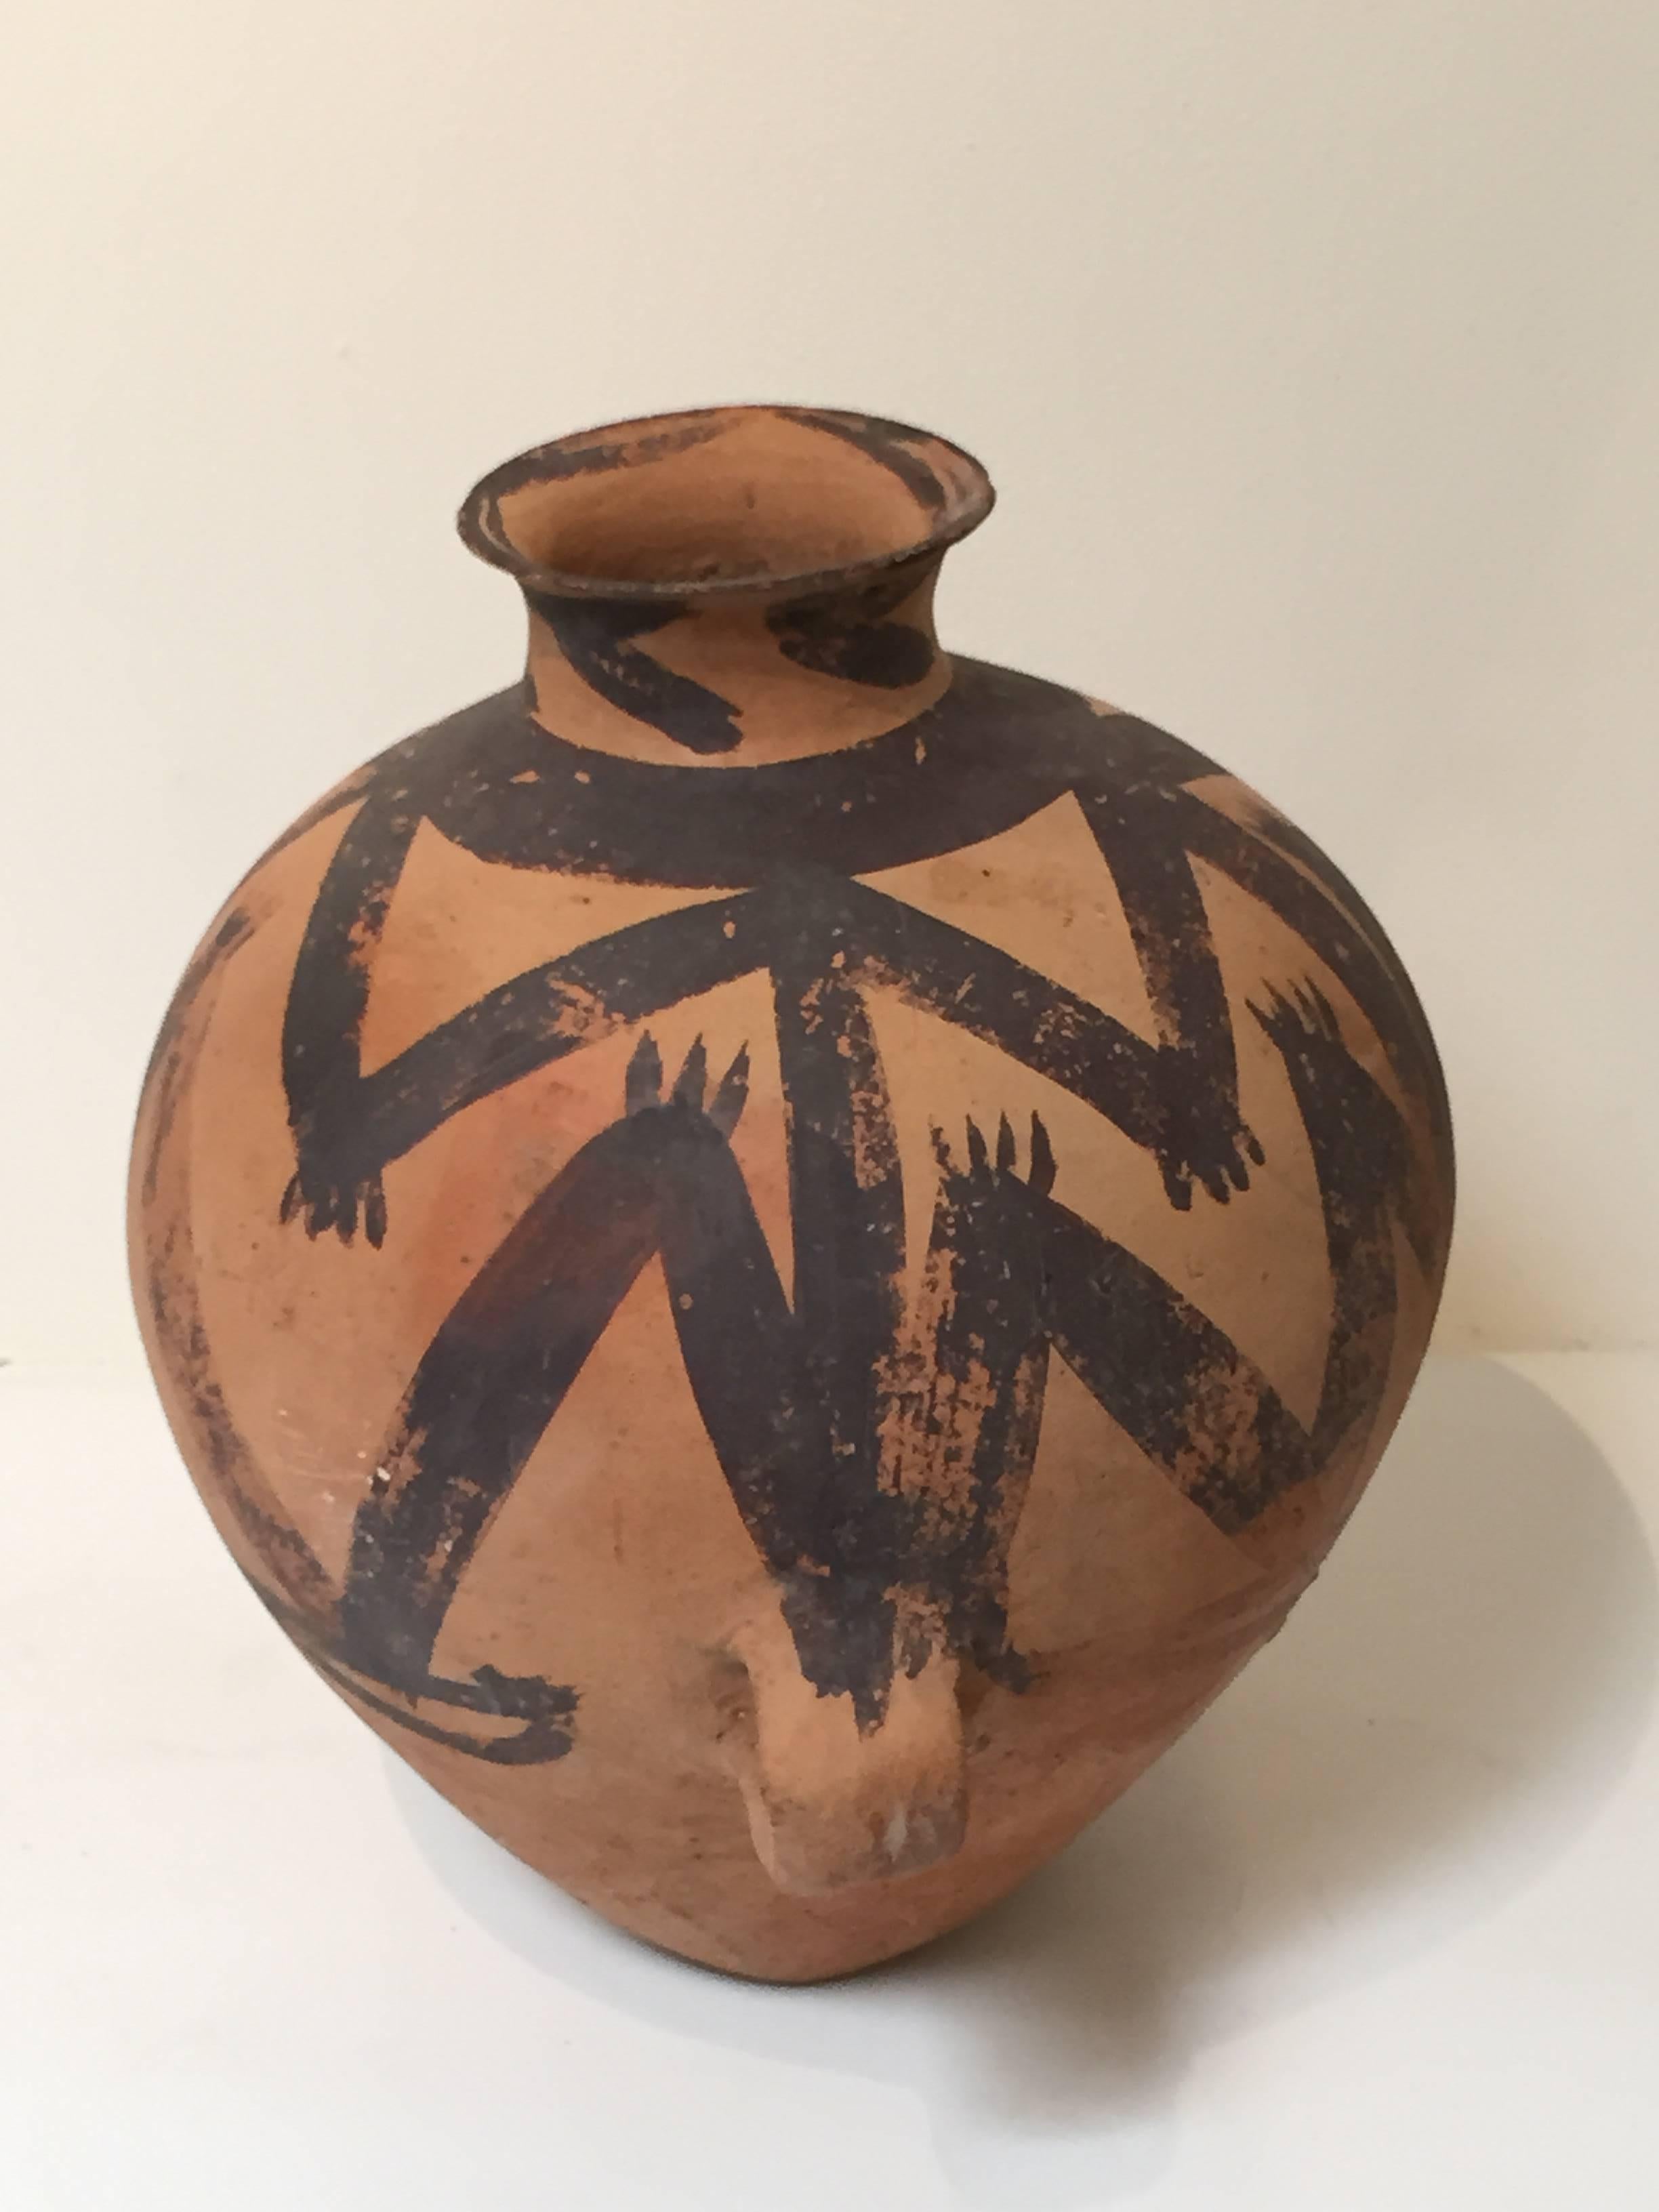 A Neolithic pot dating to the Majiayao Culture (circa 2500 BC). Machang type.
All natural pigments with a frog pattern design.